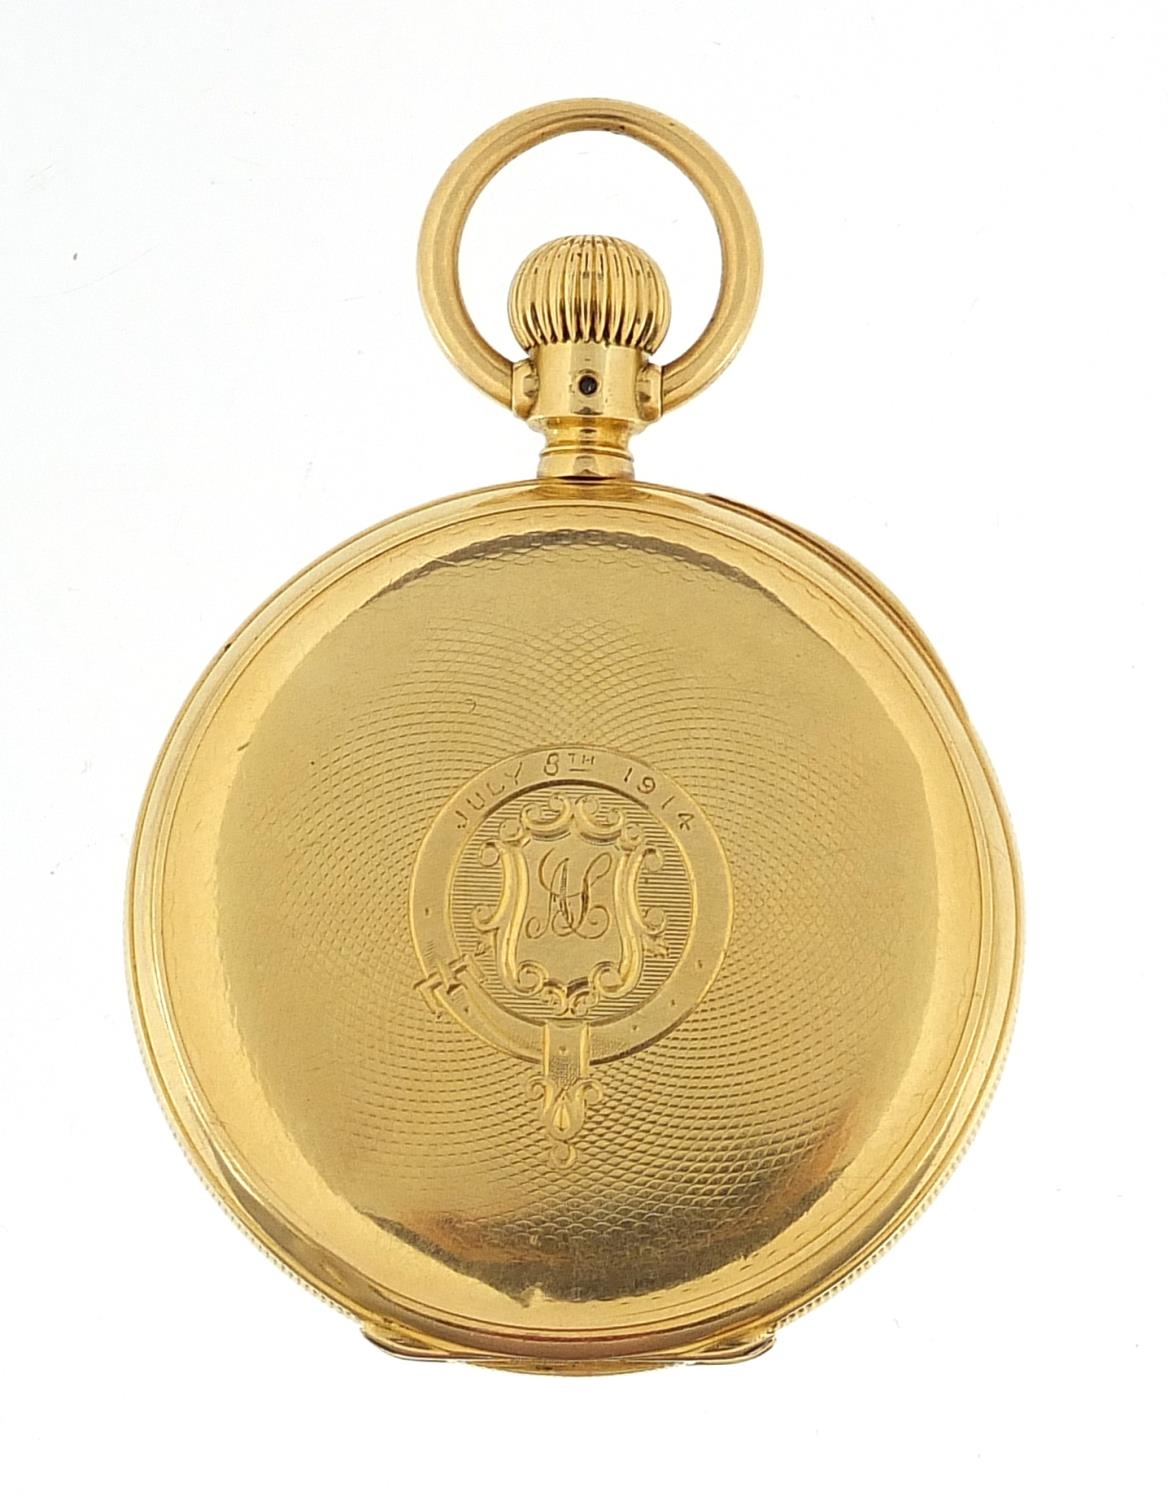 Waltham Mass, gentlemen's 18ct gold open face pocket watch with enamelled dial, the movement - Image 8 of 8